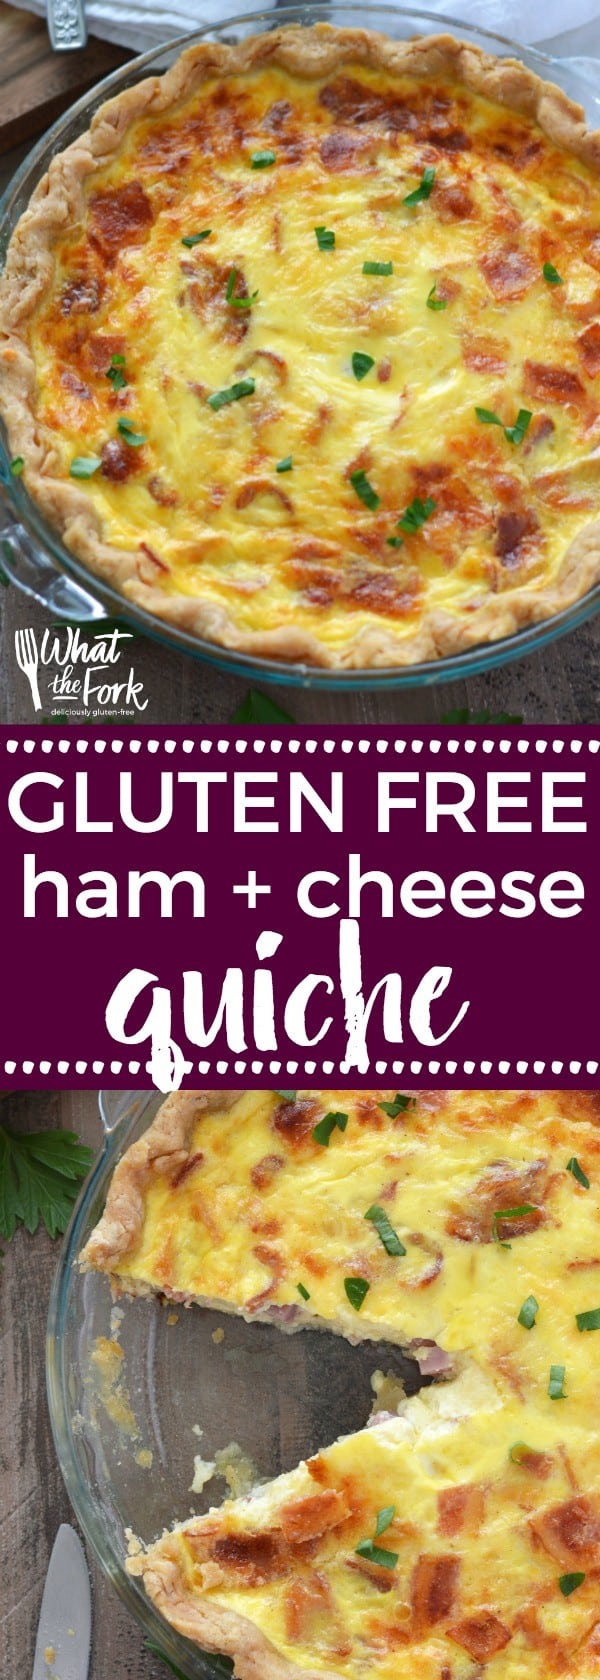 Gluten Free Ham and Cheese Quiche is perfect for breakfast, brunch, or dinner. Easy quiche recipe from @WhatTheForkBlog | whattheforkfoodblog.com | gluten free breakfast recipes | gluten free brunch recipes | quiche recipes | ham and cheese recipes | how to make quiche | what to put in quiche | ham cheese breakfast quiche | gluten free quiche | quiche with gluten free crust | popular quiche recipes | best quiche recipes | quiche with ham and cheese |